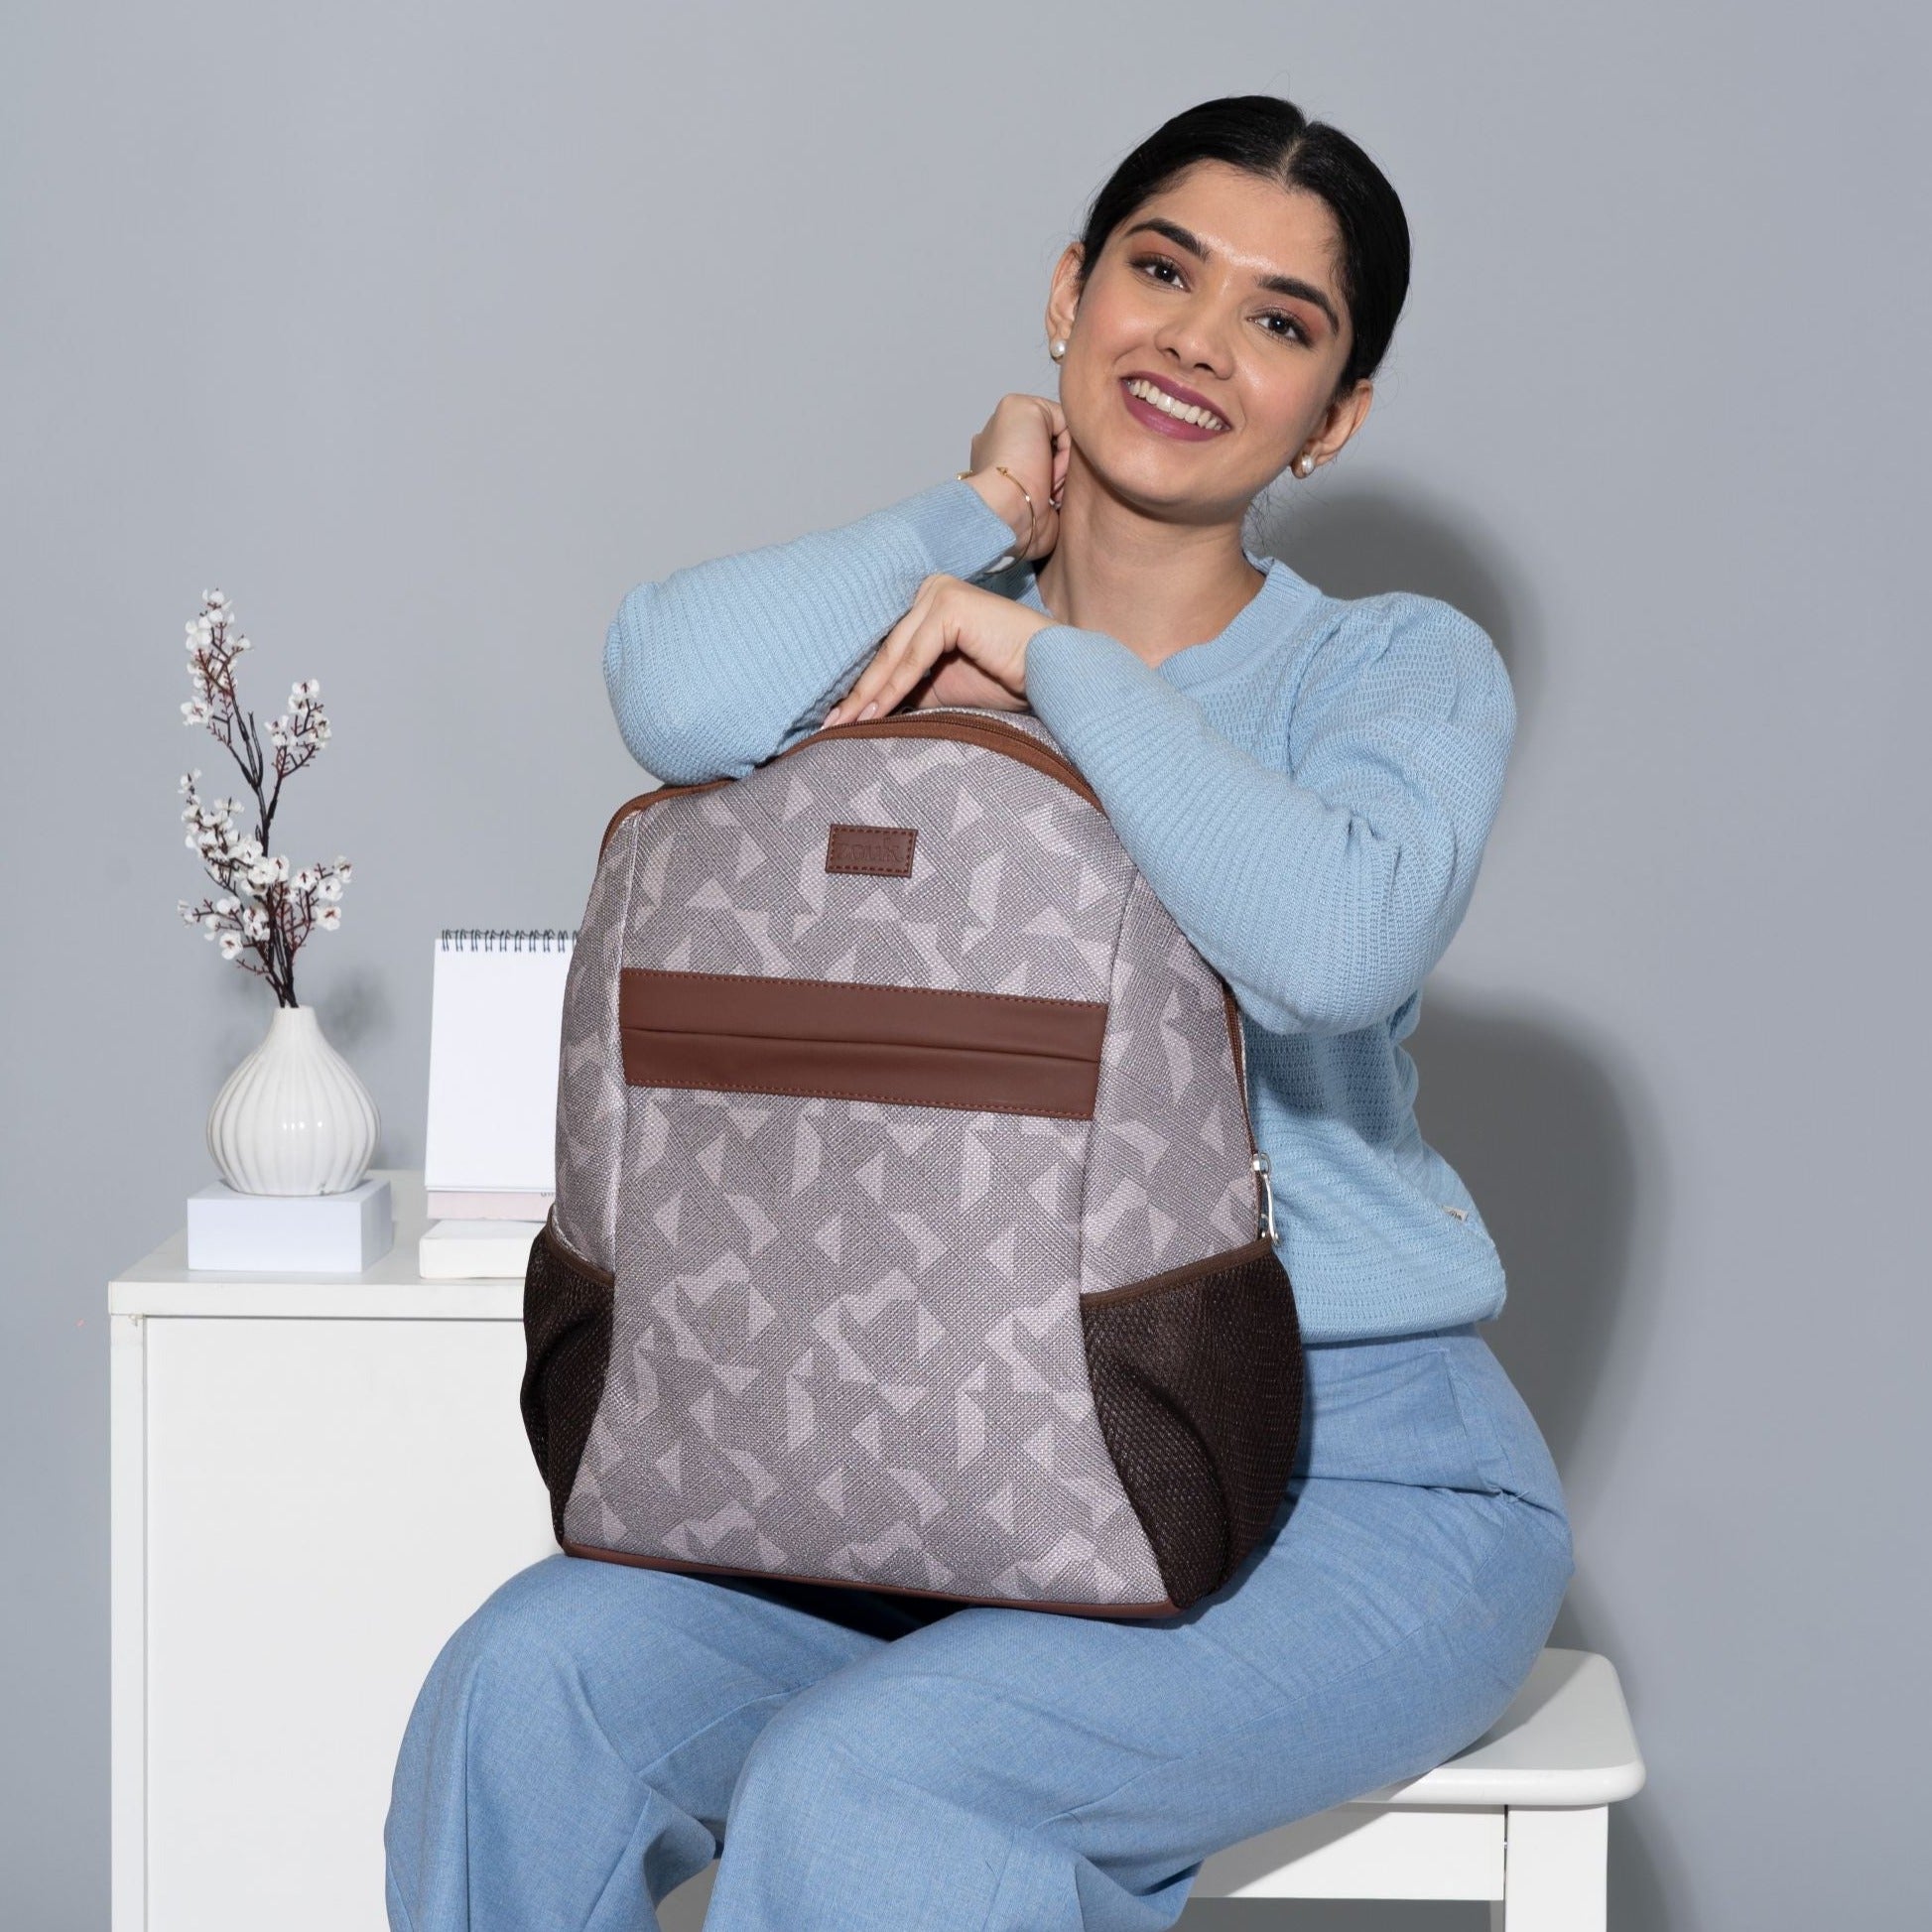 Aravalli Abstract Classic Backpack